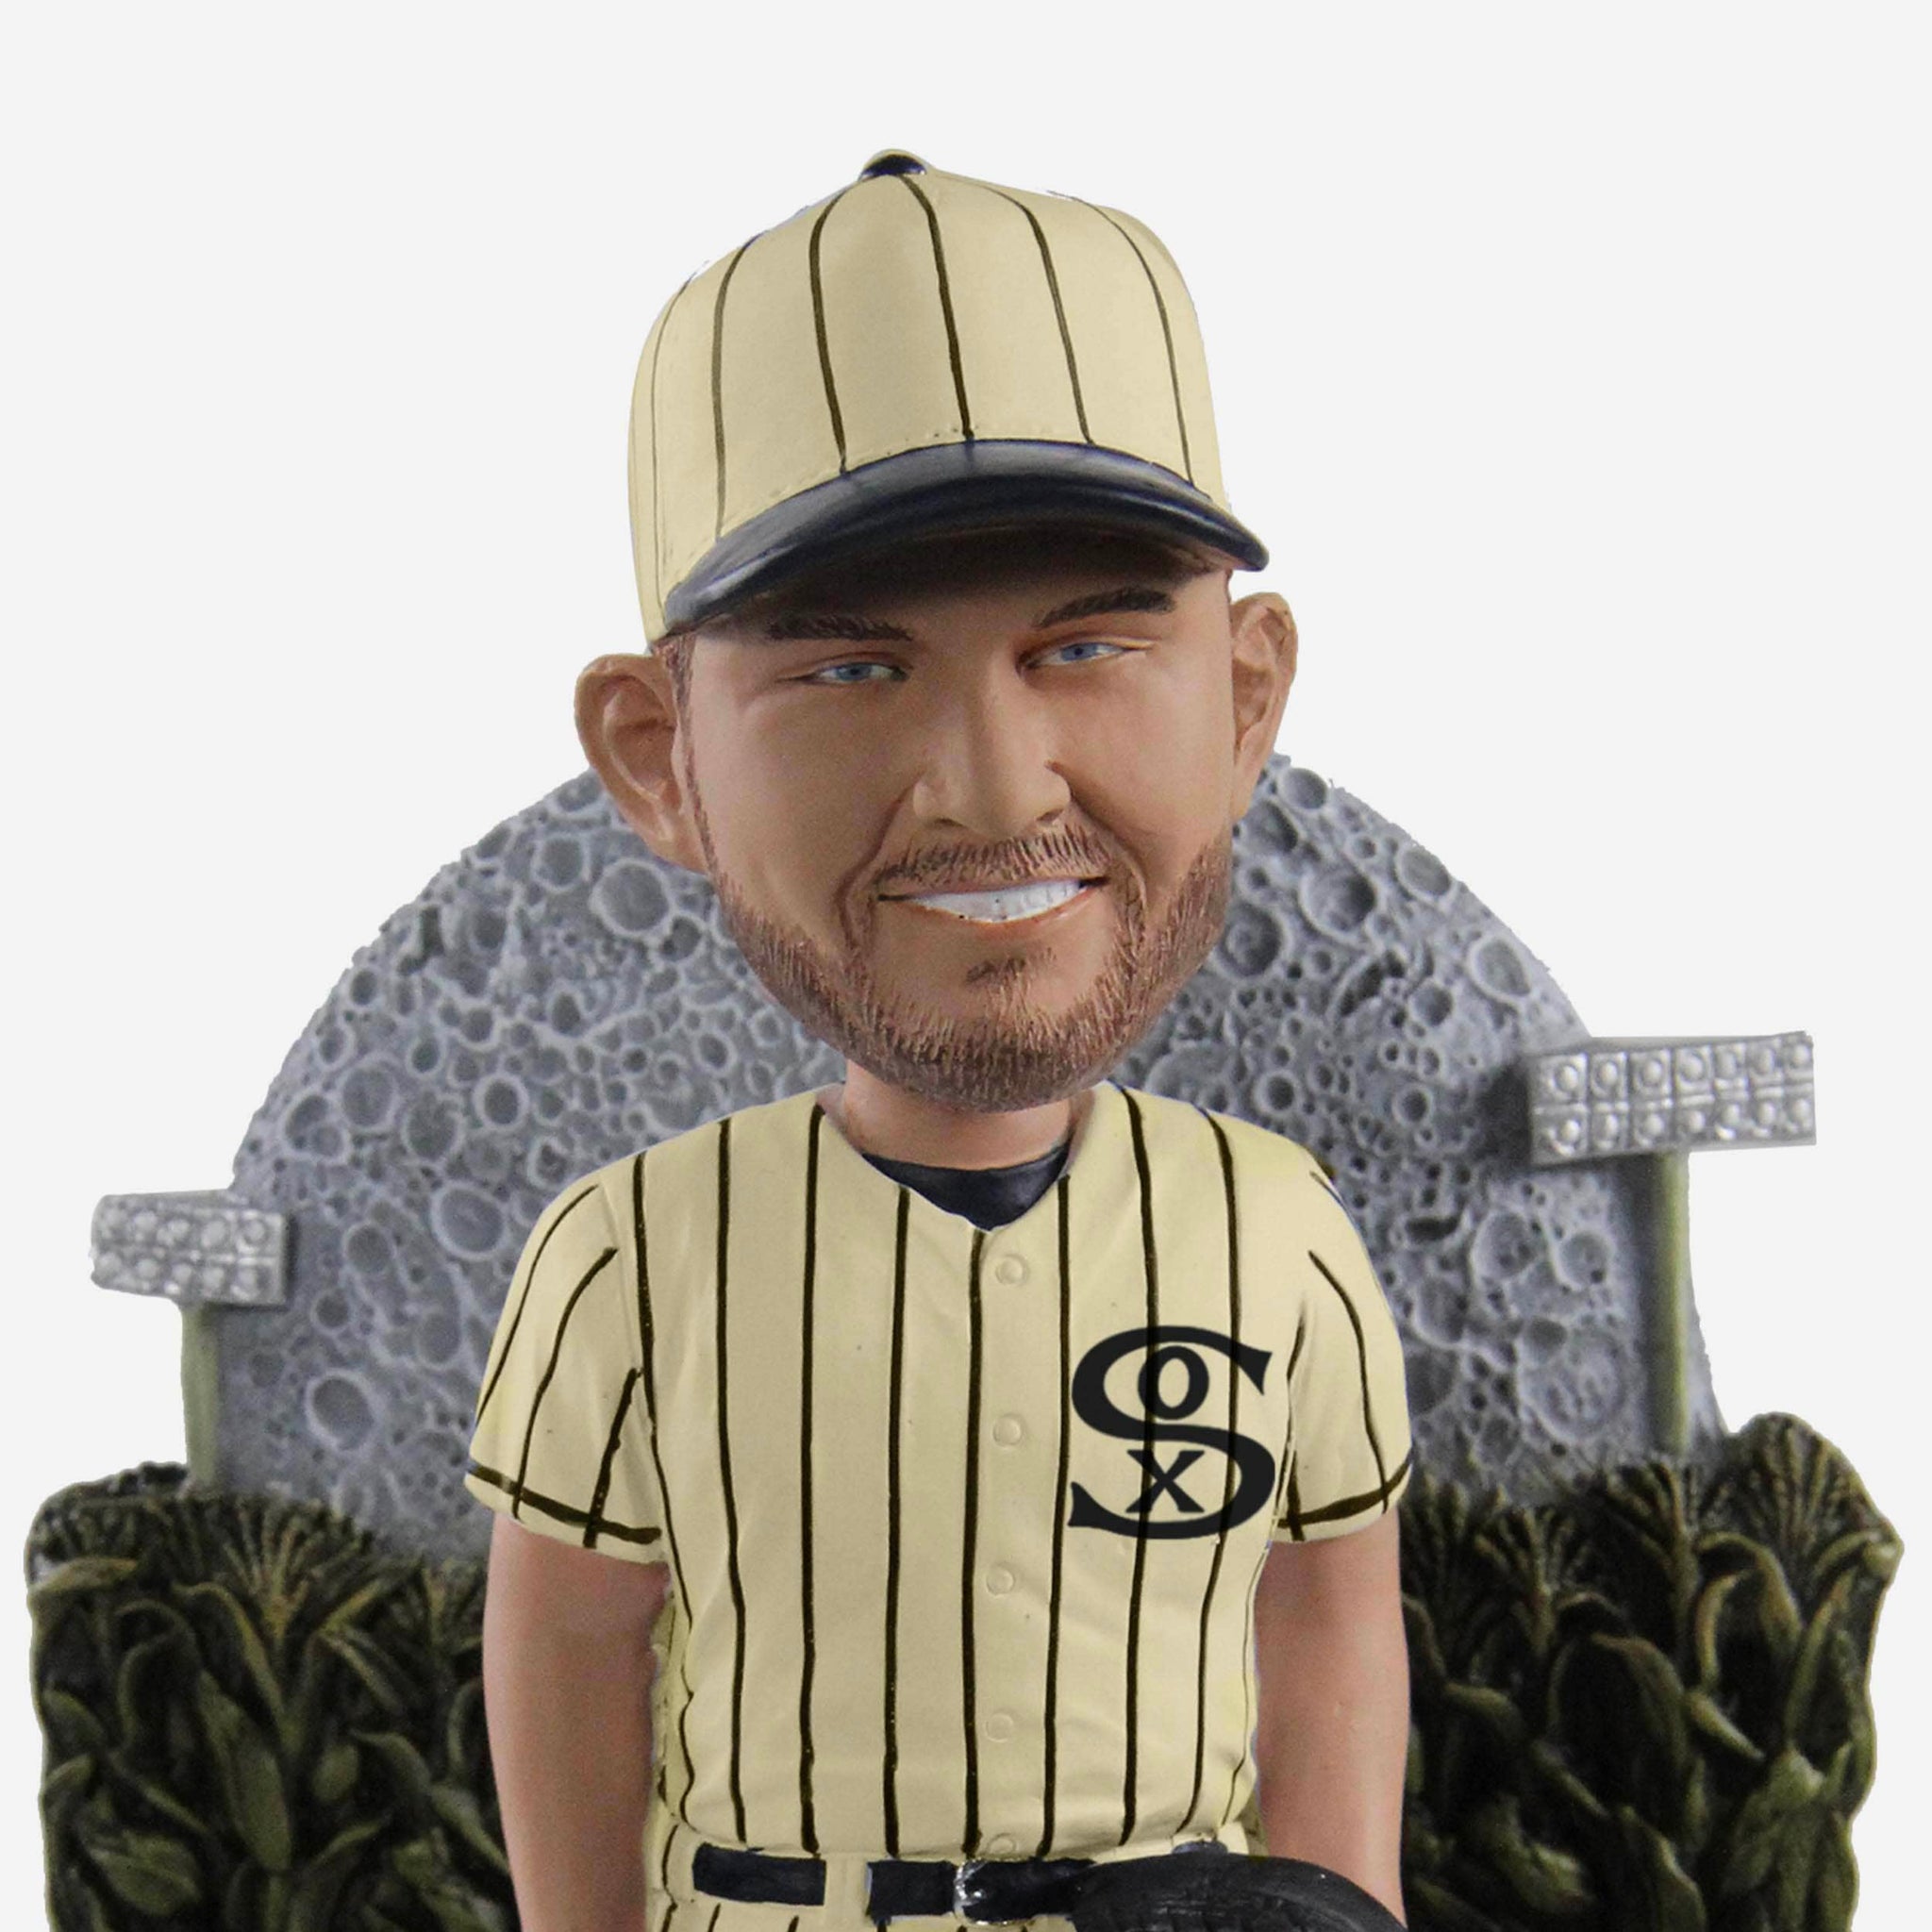 FOCO limited White Sox Field of Dreams game bobbleheads.